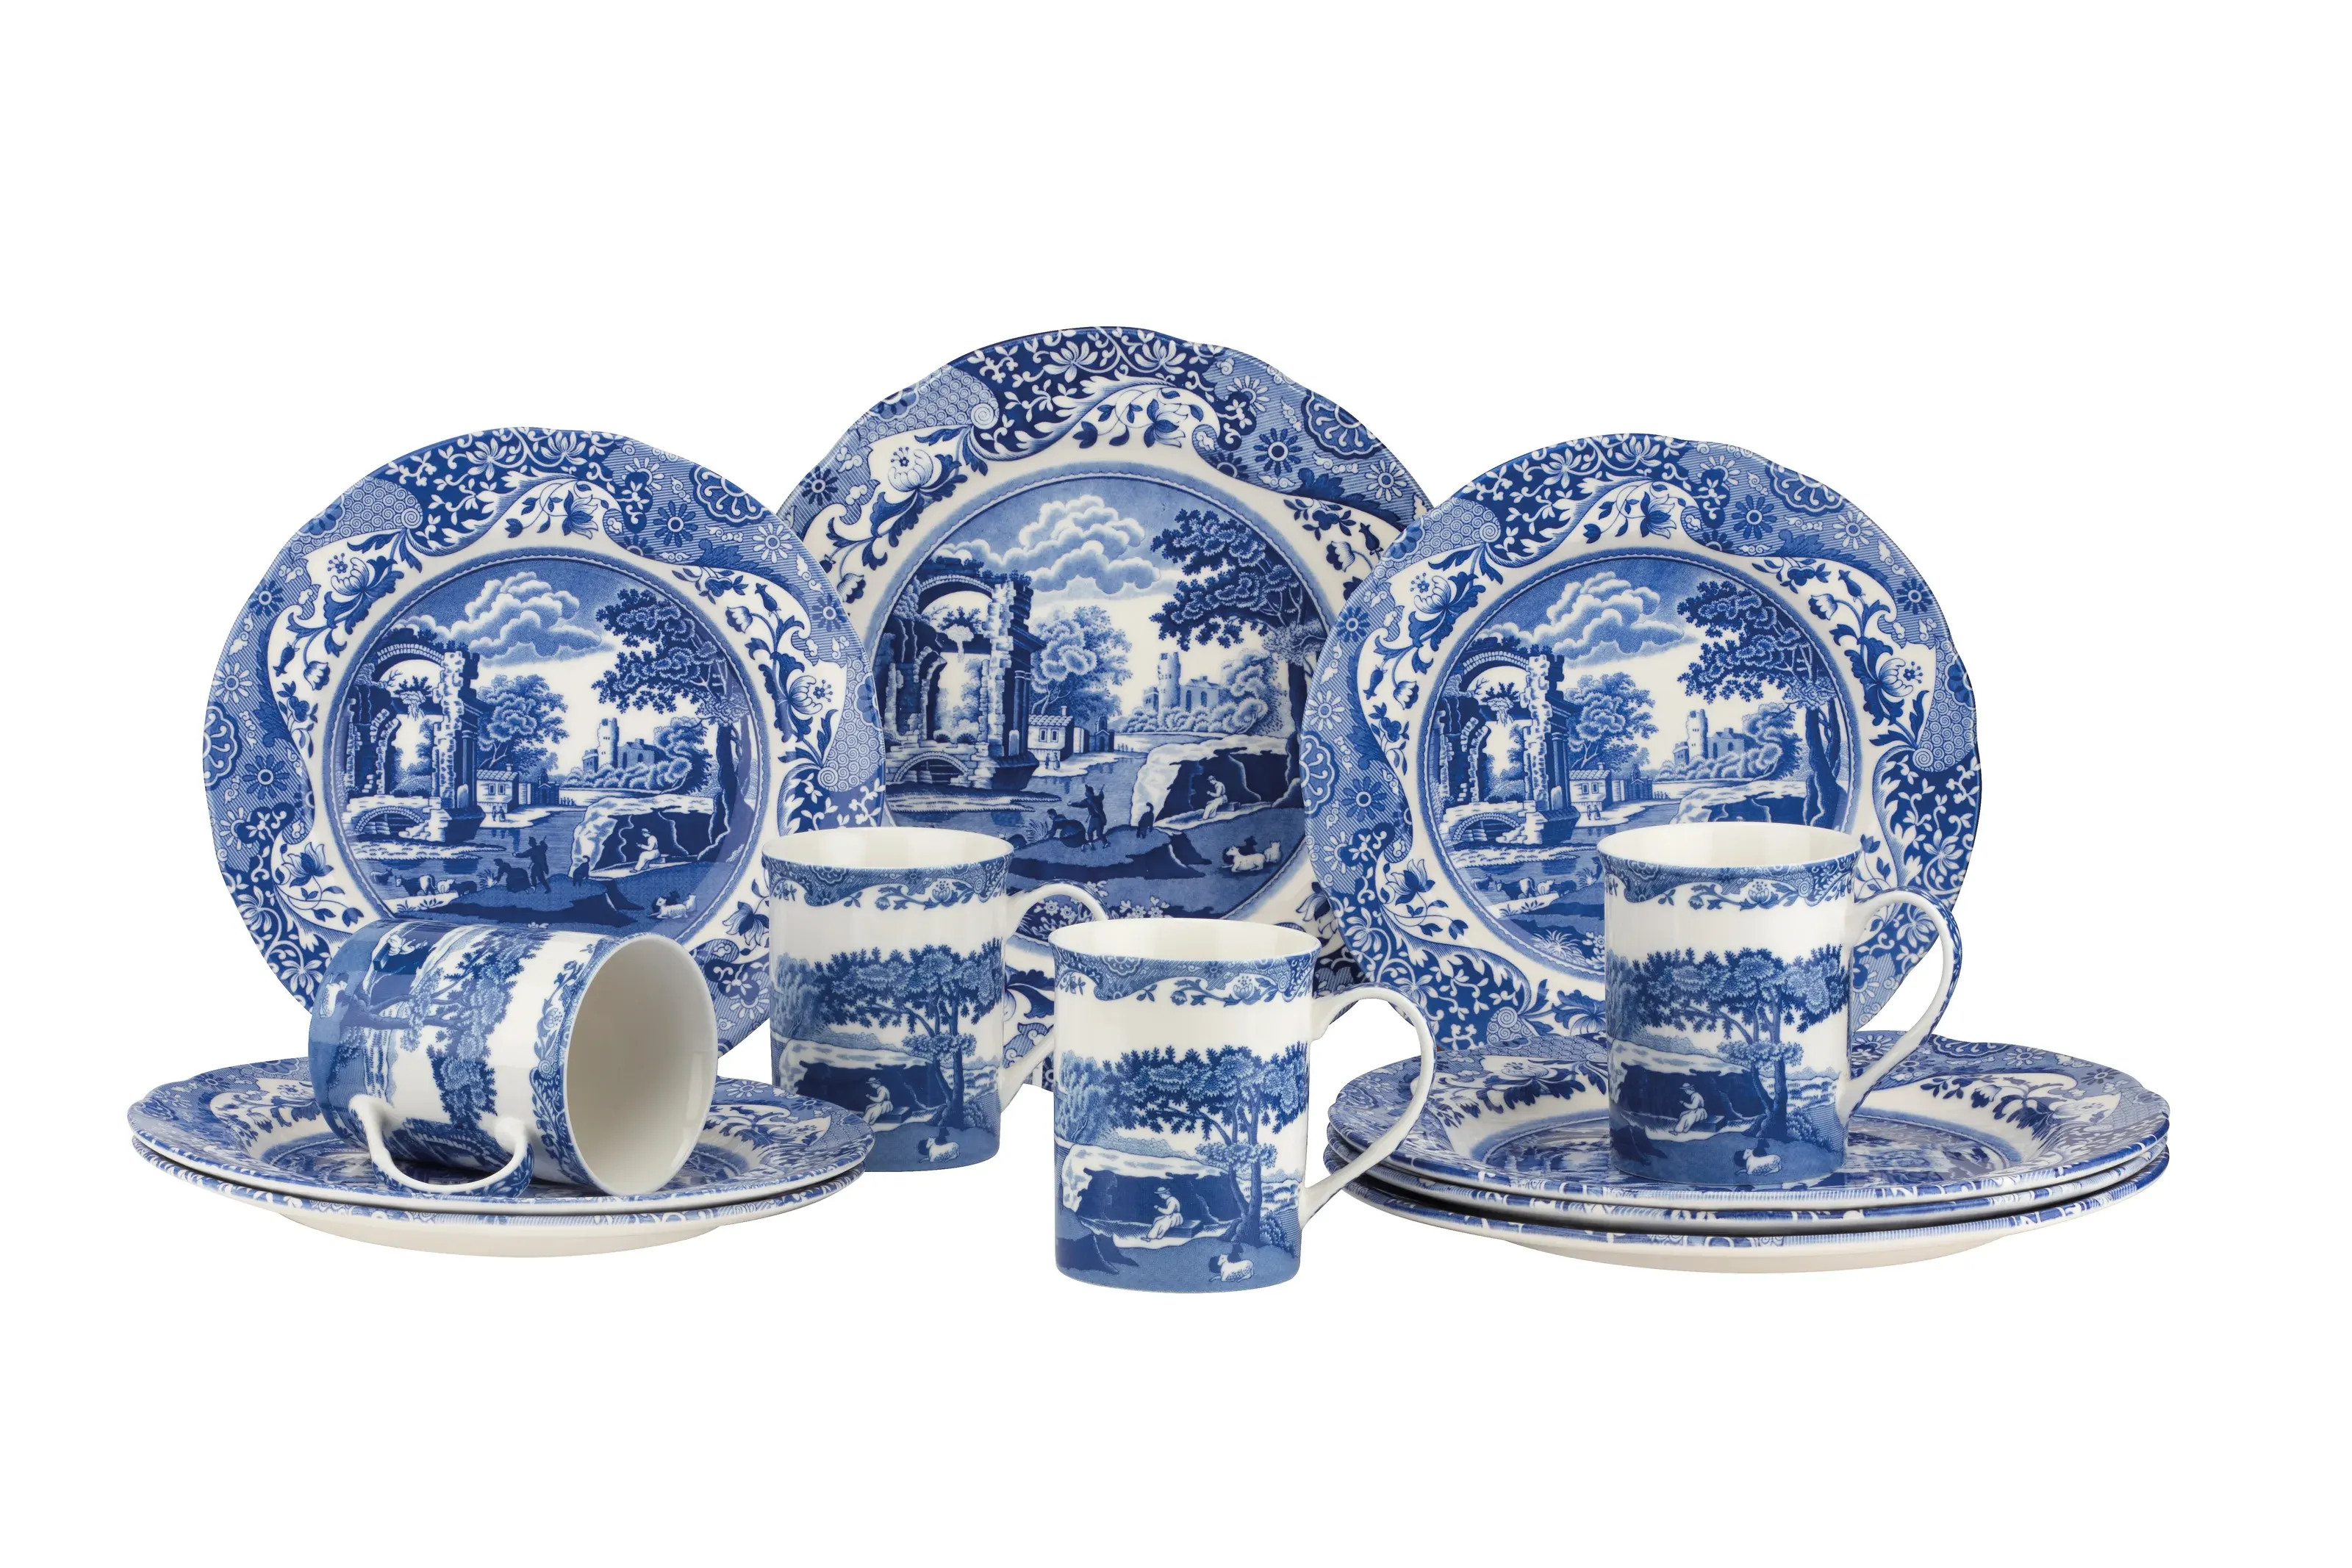 Blue and White Italian Dinner Plate Trend — Get the Look, Starting